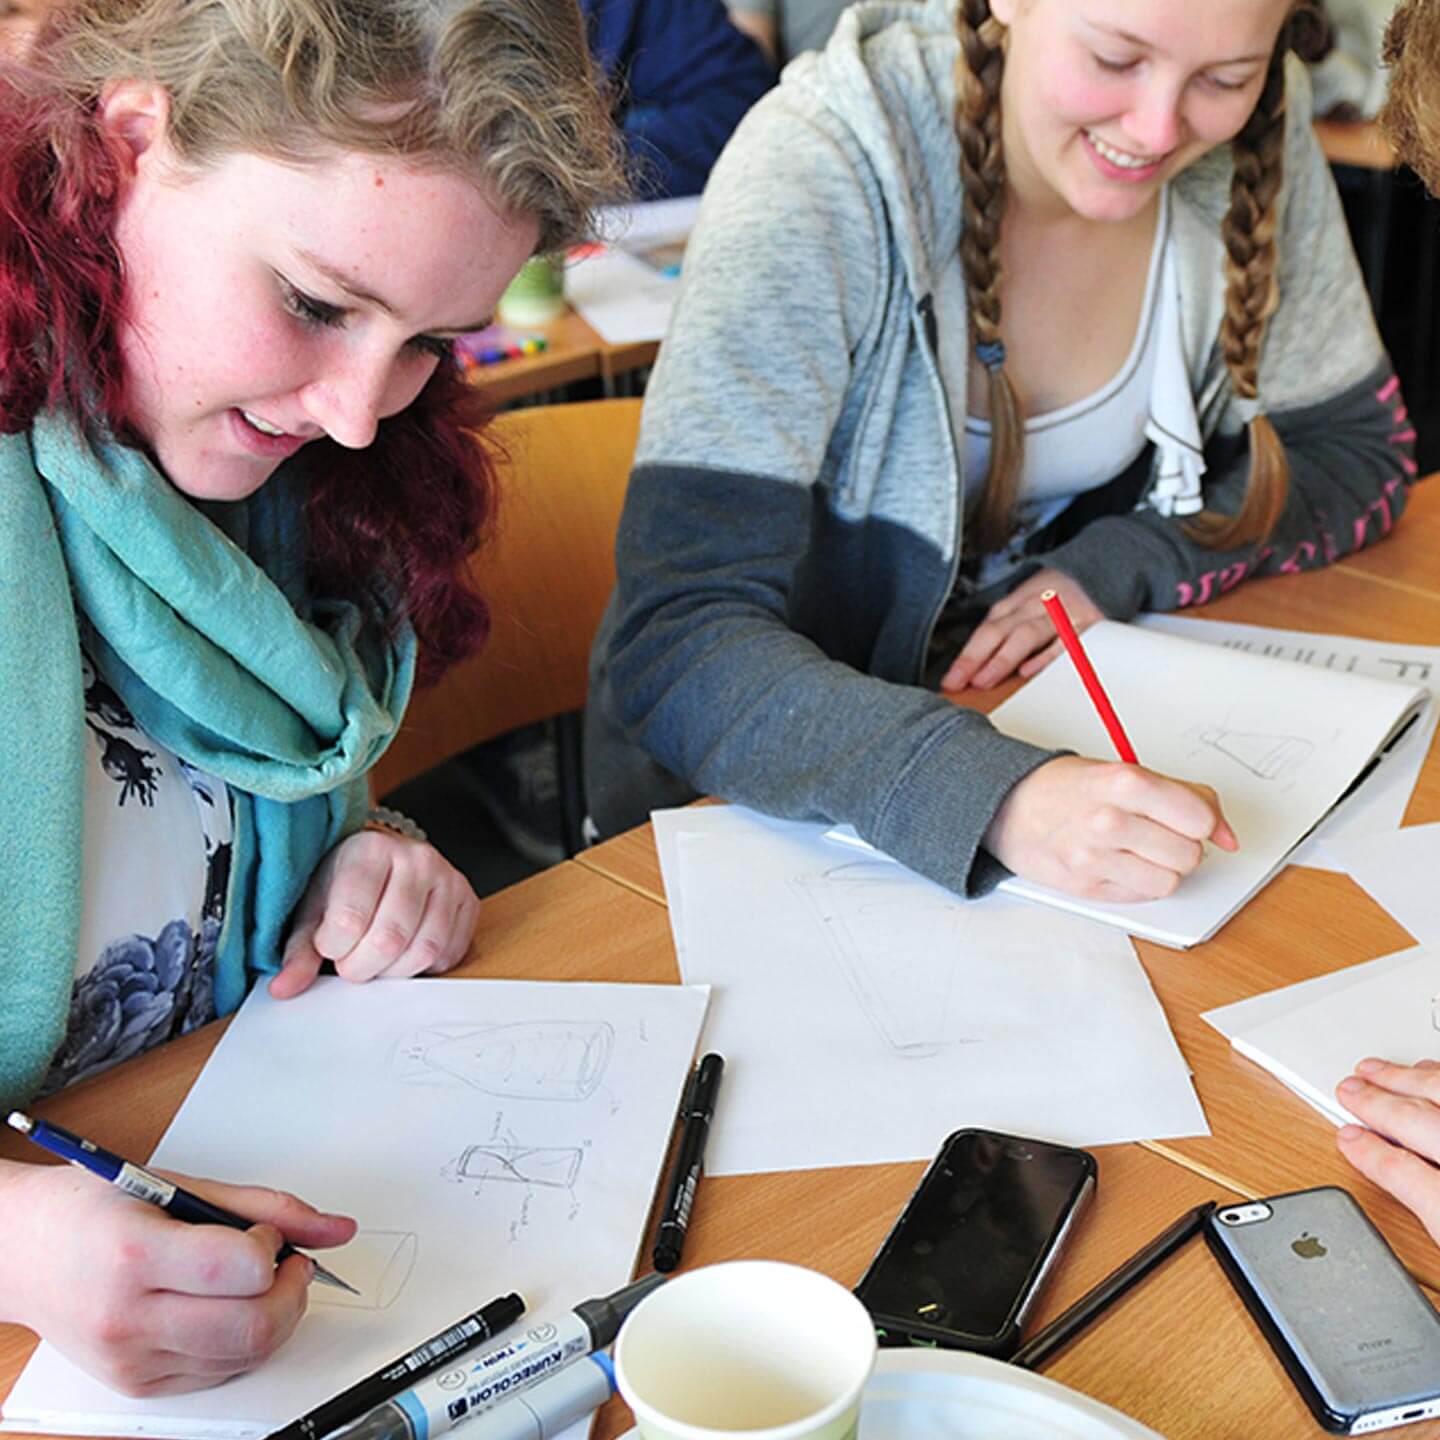 Two university students sketching their problem solving ideas in a James Dyson Foundation workshop.